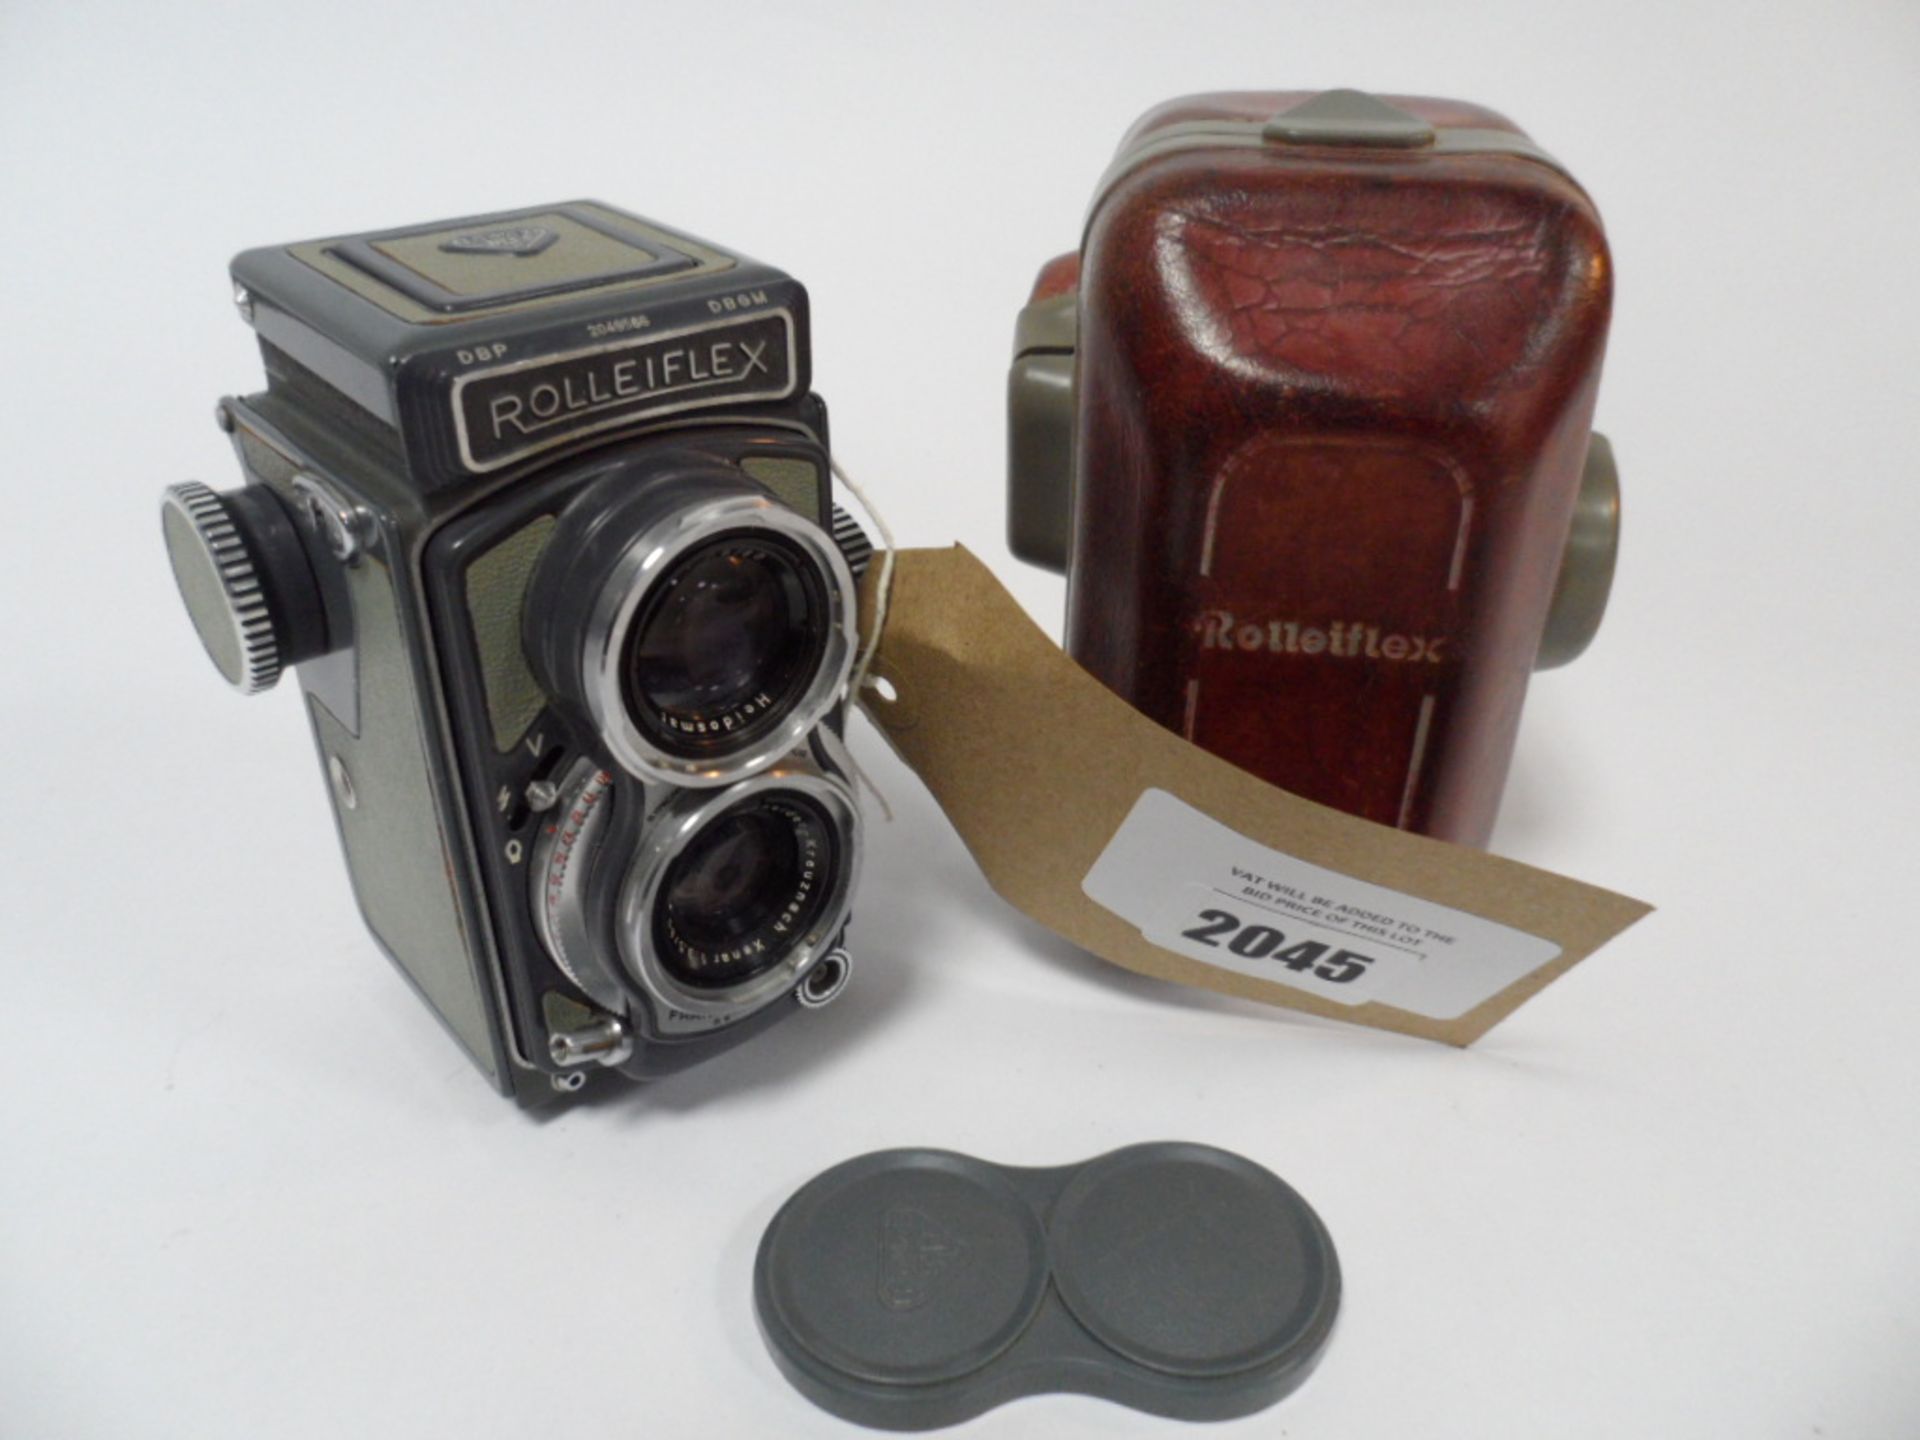 RolleiFlex 4x4 DBP DBGM Medium Format Vintage camera with lens cover and case.